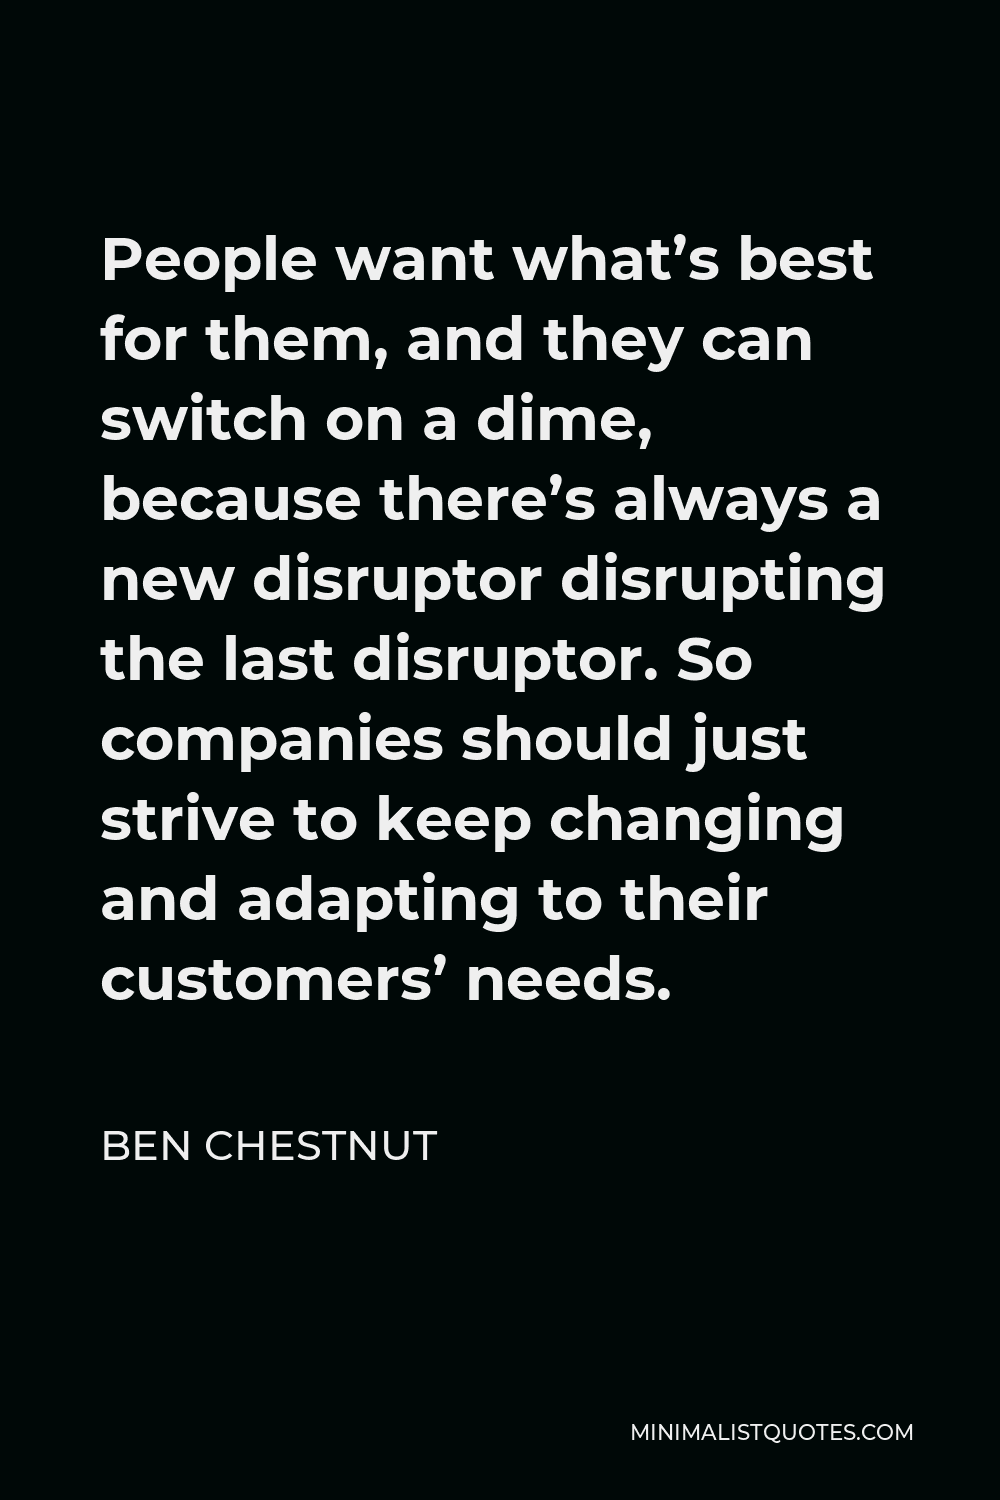 Ben Chestnut Quote - People want what’s best for them, and they can switch on a dime, because there’s always a new disruptor disrupting the last disruptor. So companies should just strive to keep changing and adapting to their customers’ needs.